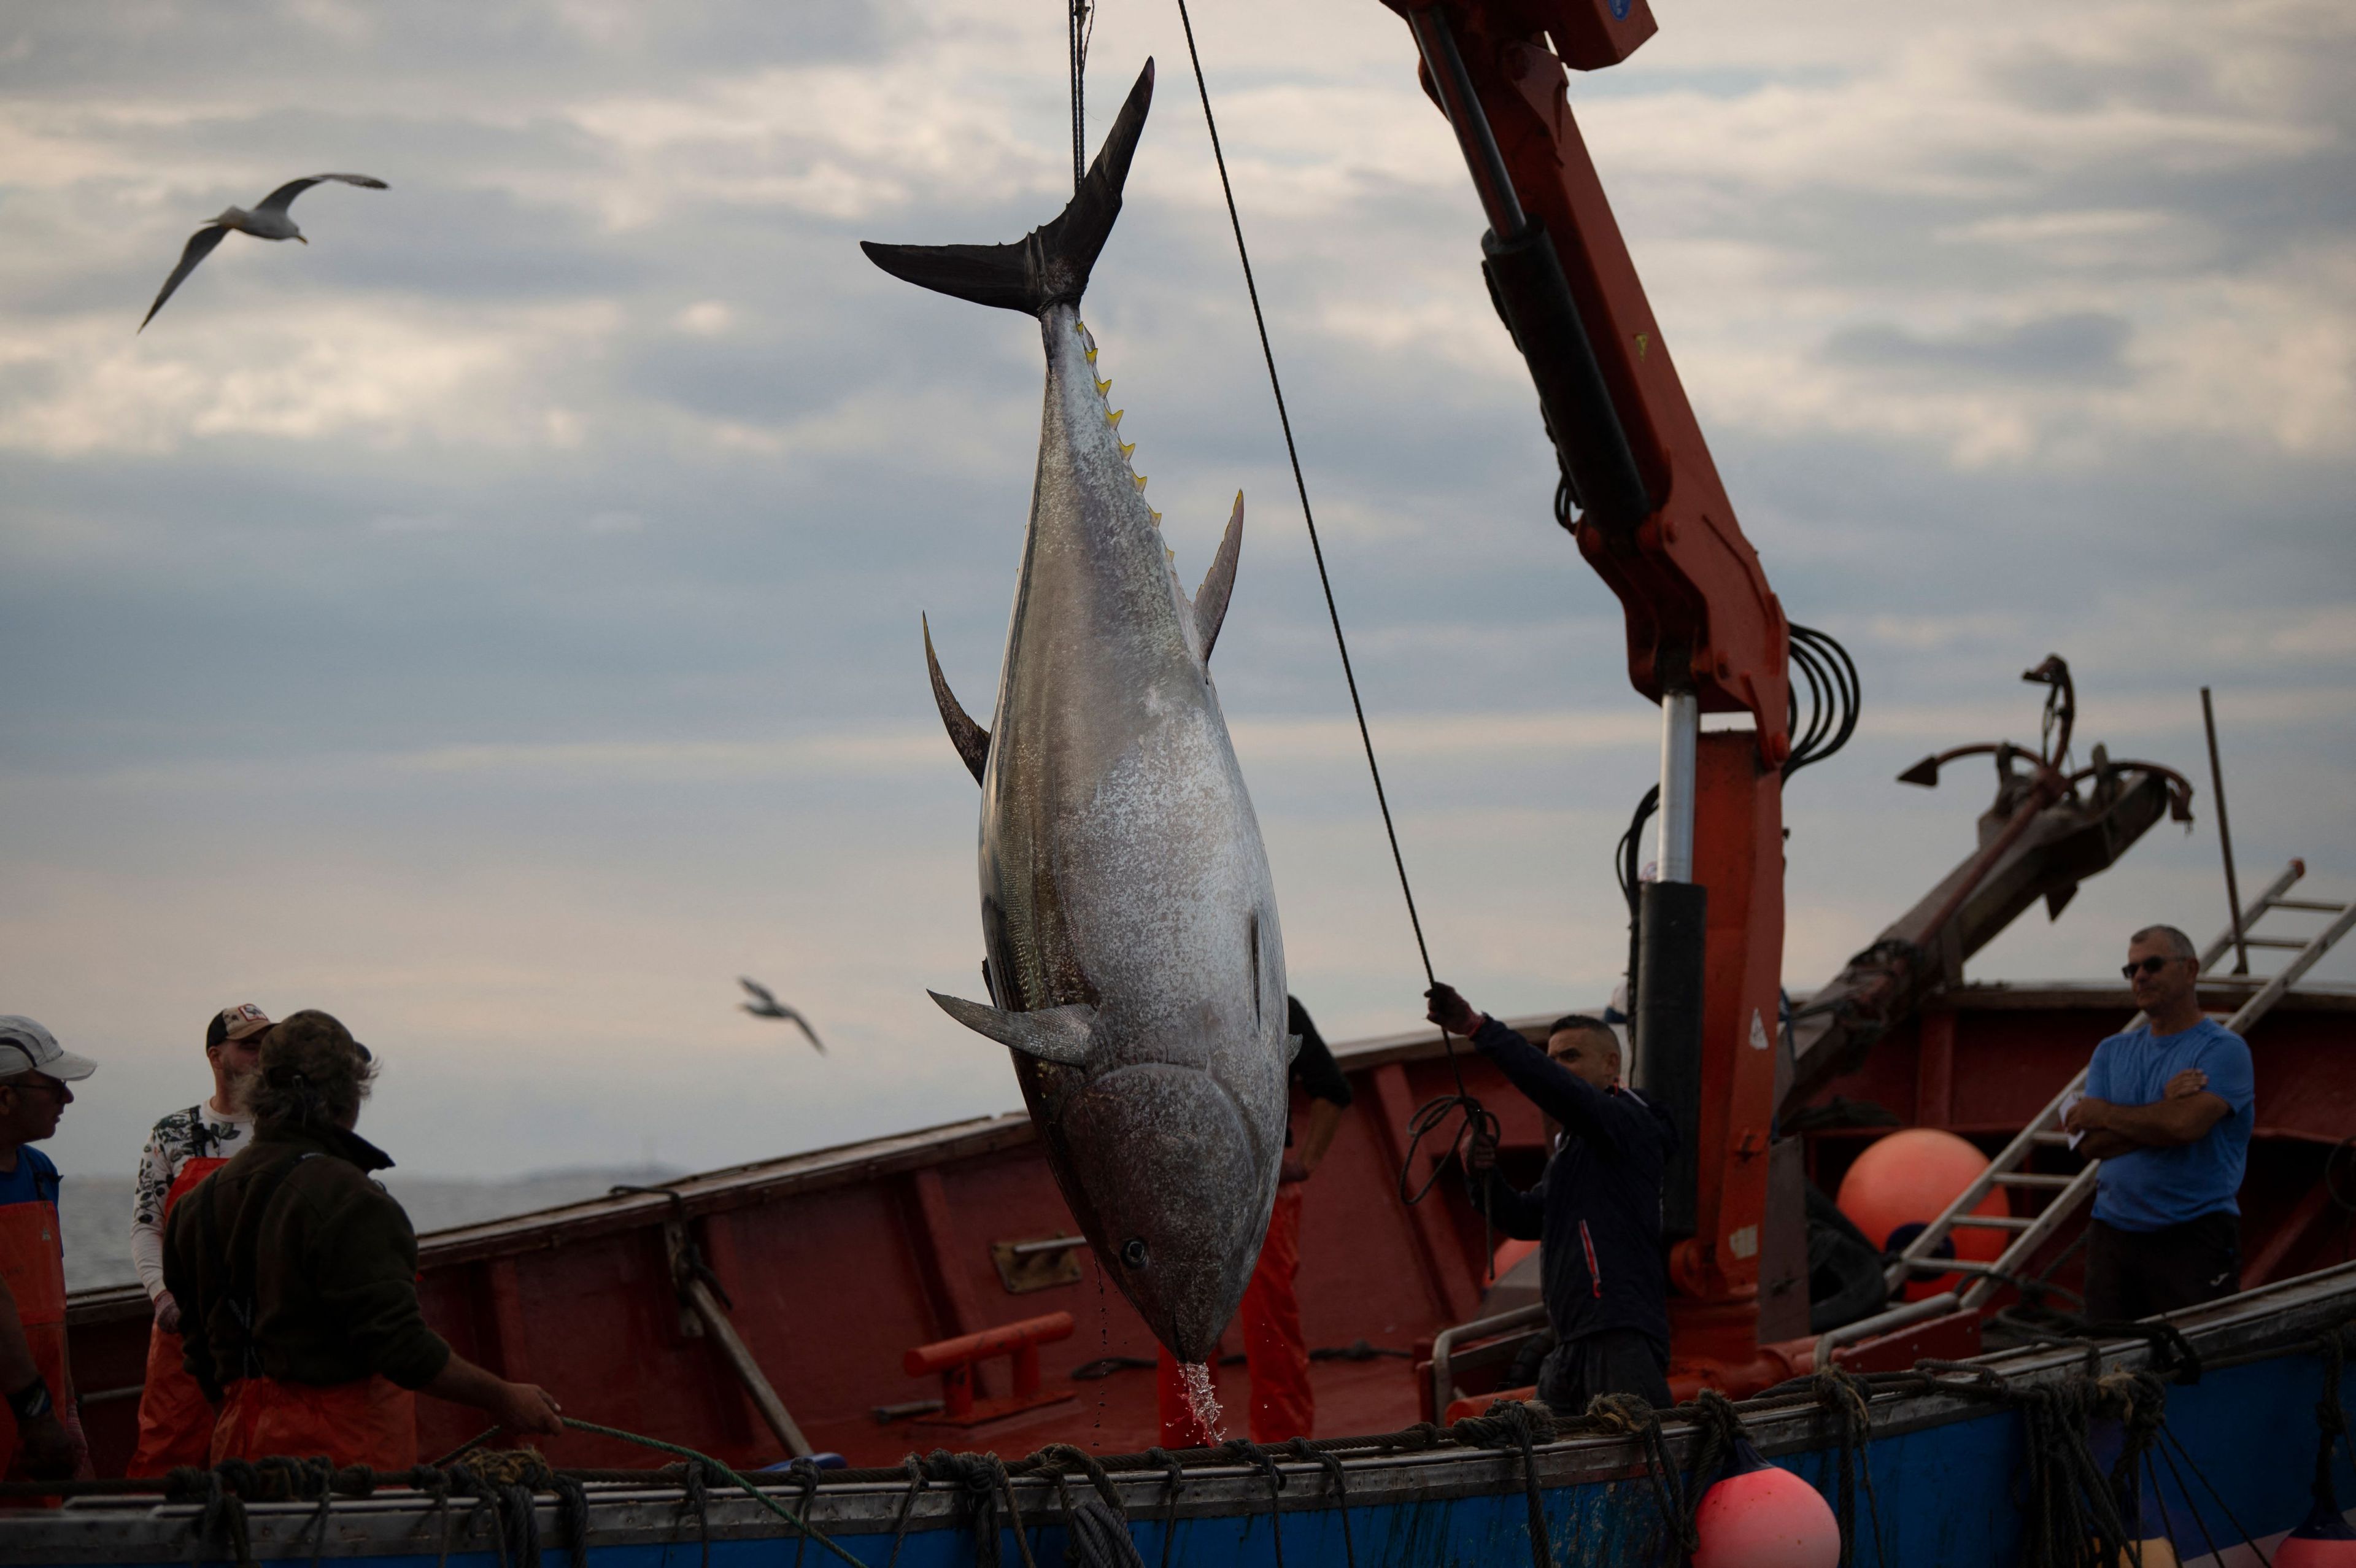 A group of people on a fishing boat use a crane to lift a massive tuna out of the water. Gulls fly above, and the sky is overcast.